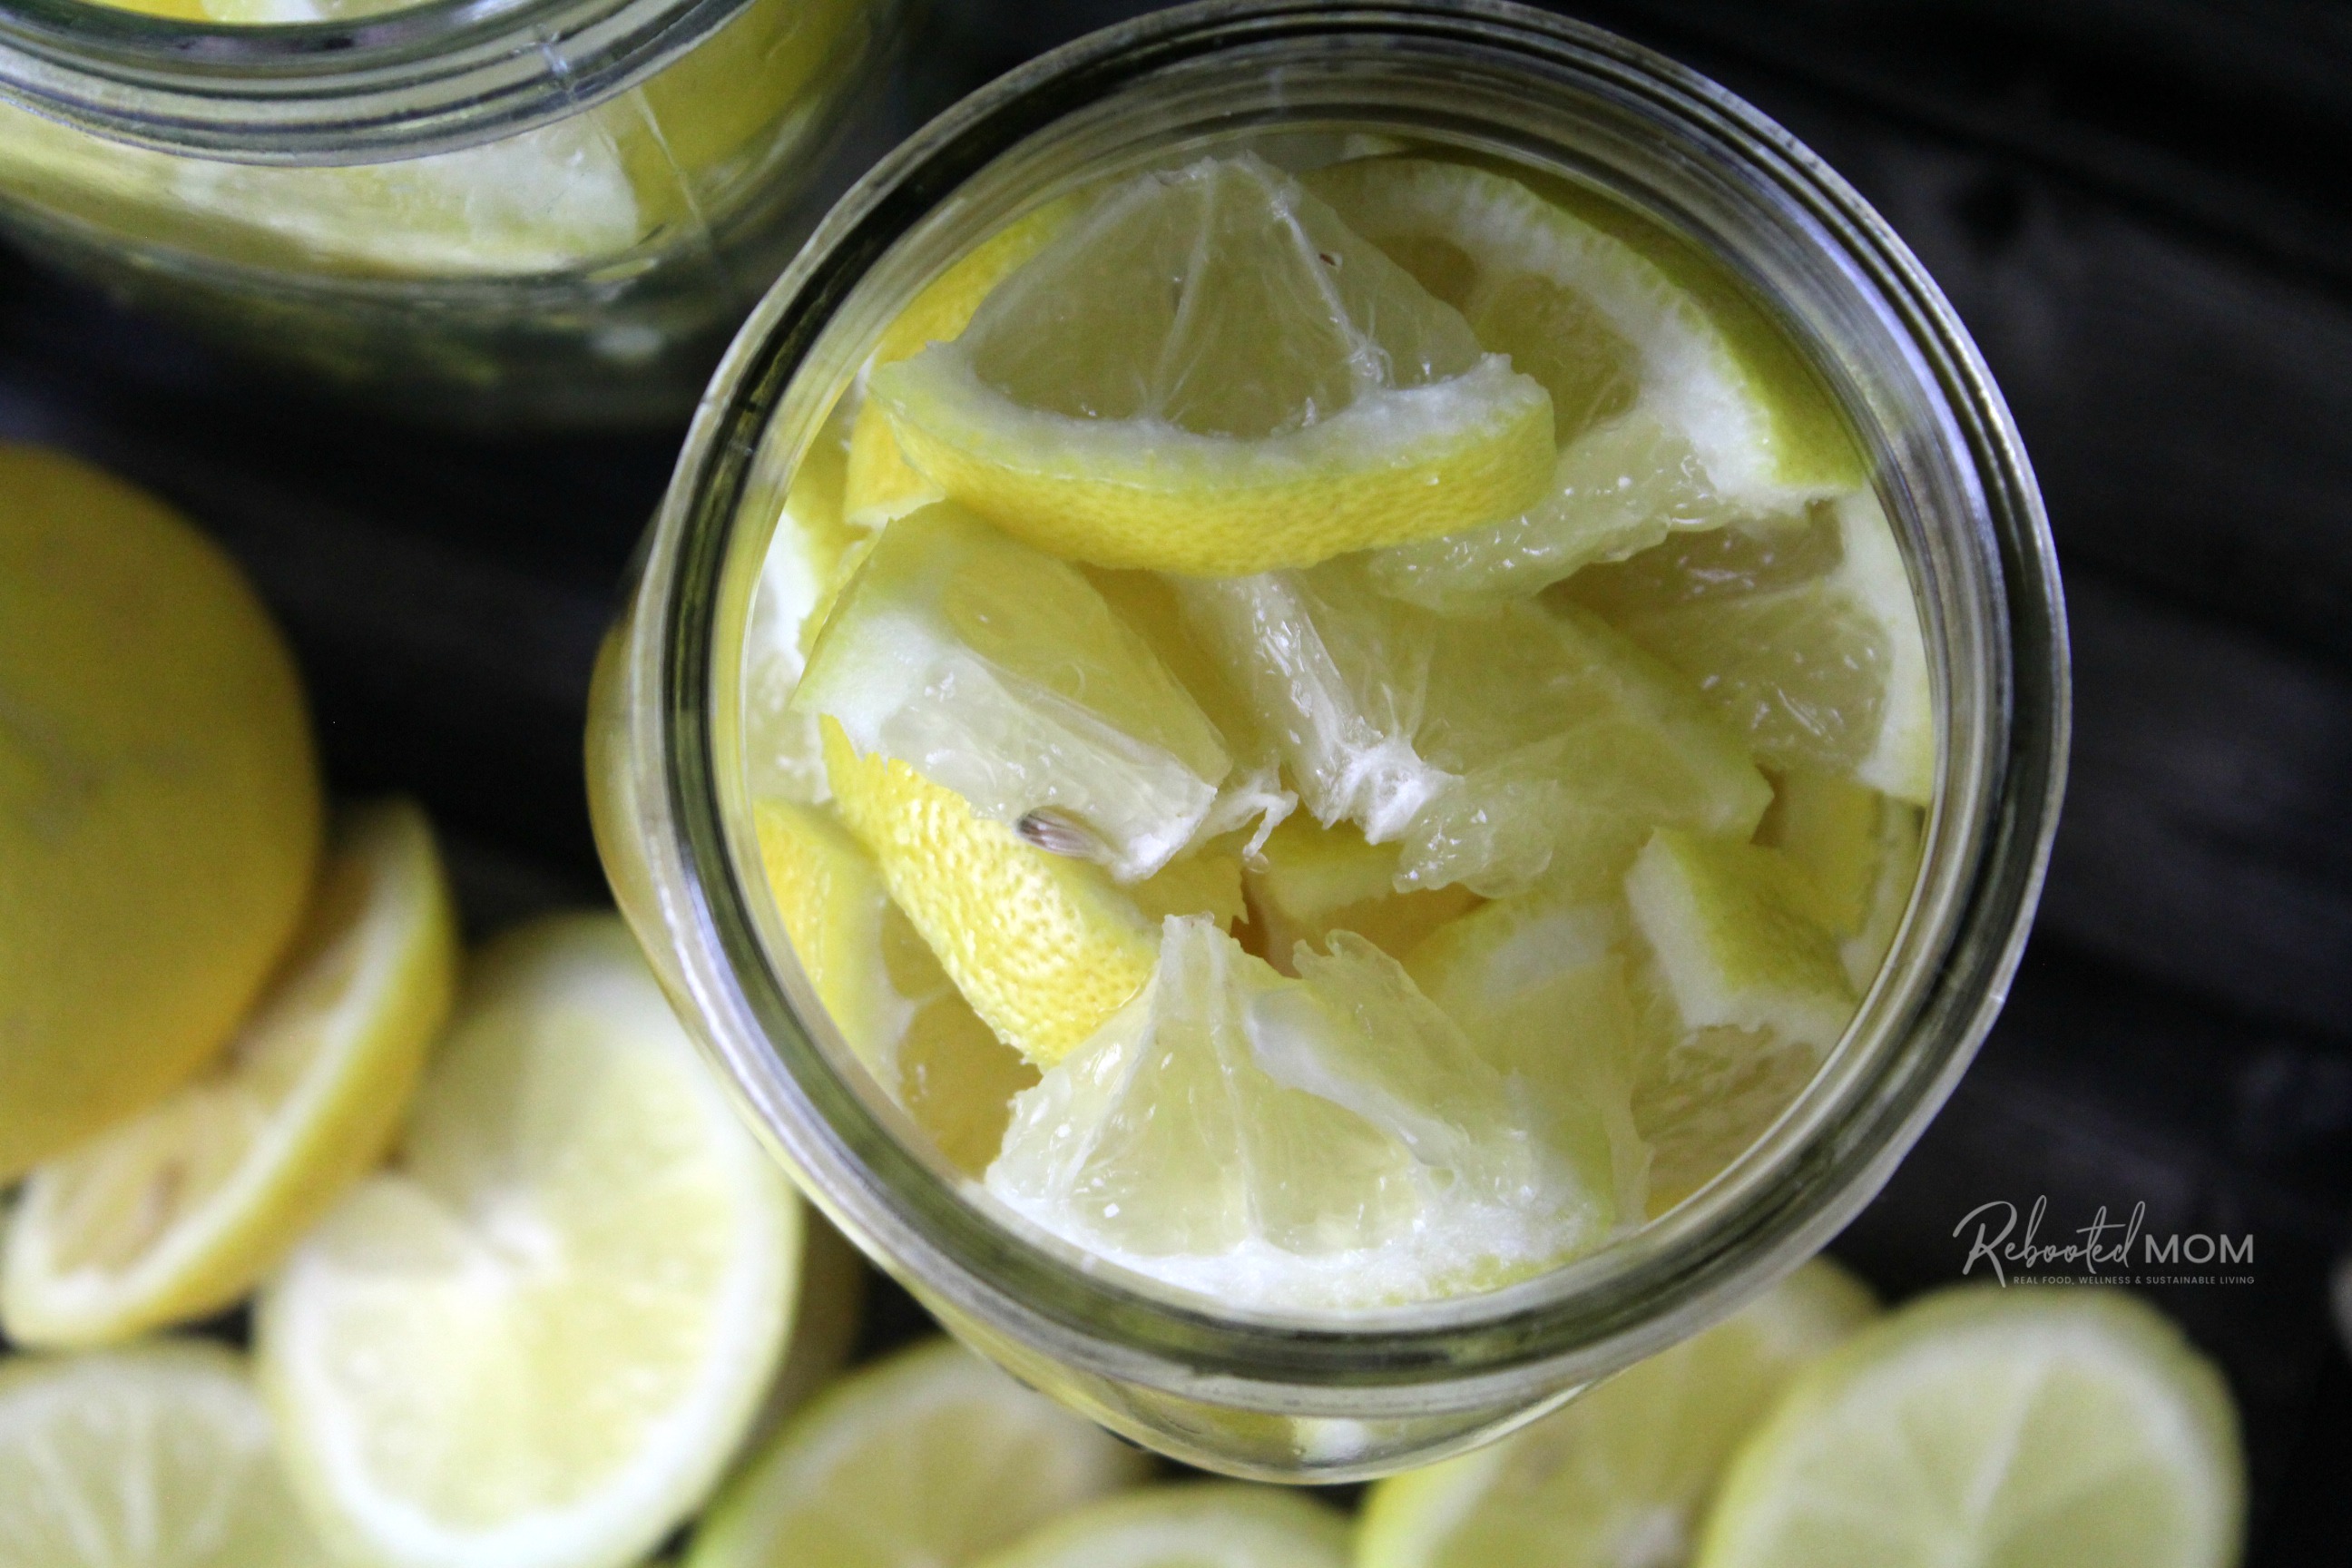 Fermenting lemons  \\ An amazing condiment, preserved lemons (fermented lemons) have added probiotics and are a wonderful addition to vegetable, pasta, meat and salad dishes.